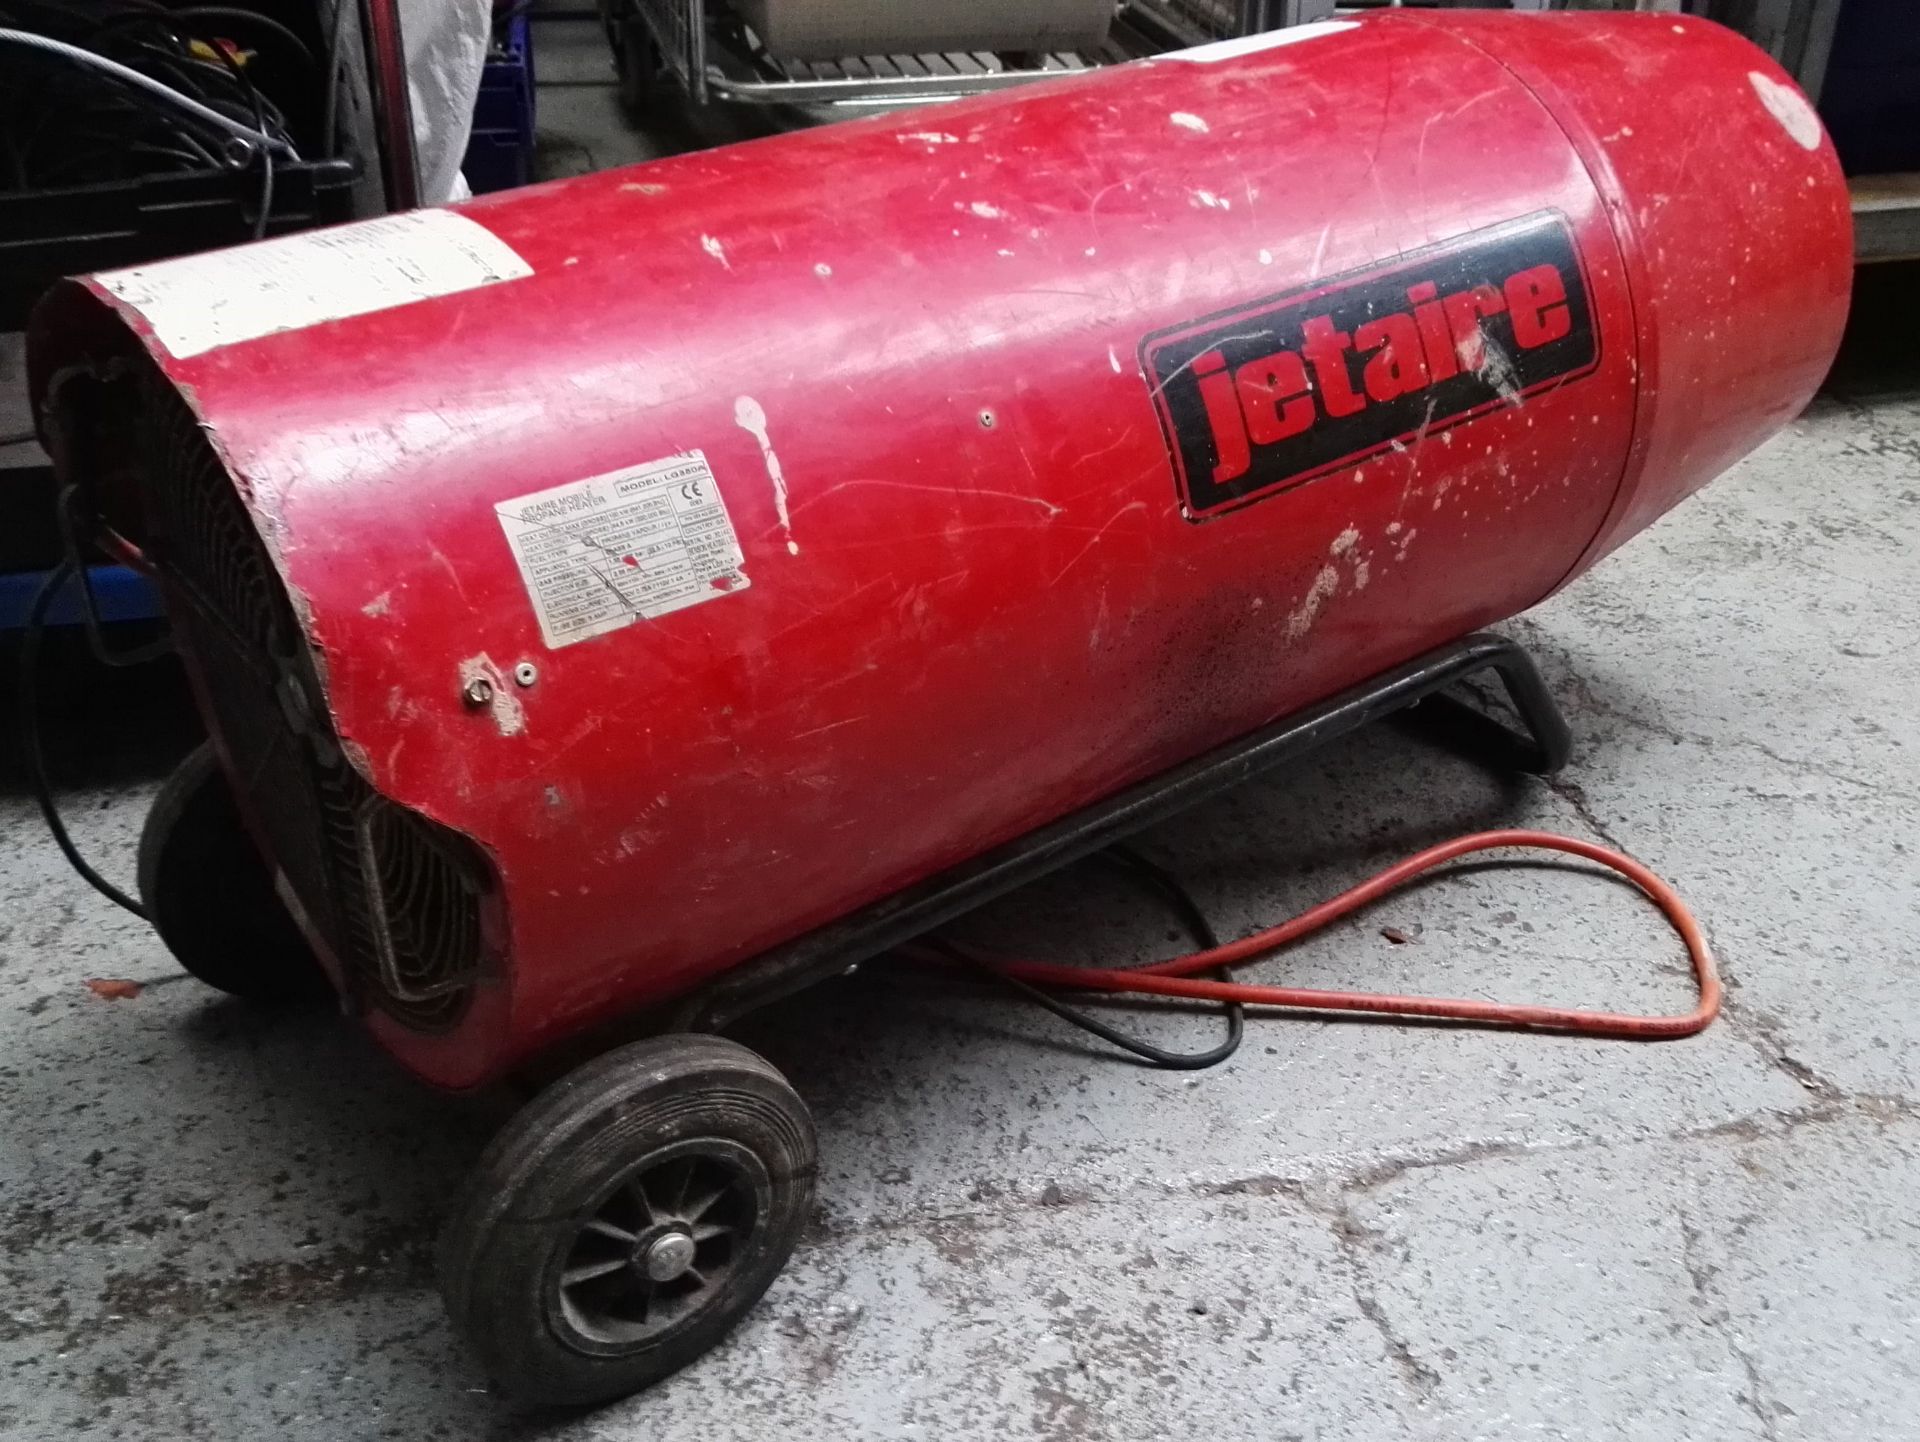 1 x Jetaire LG350A 100kW Mobile Propane Heater - CL011 - Location: Altrincham WA14 Removed from a wo - Image 5 of 16